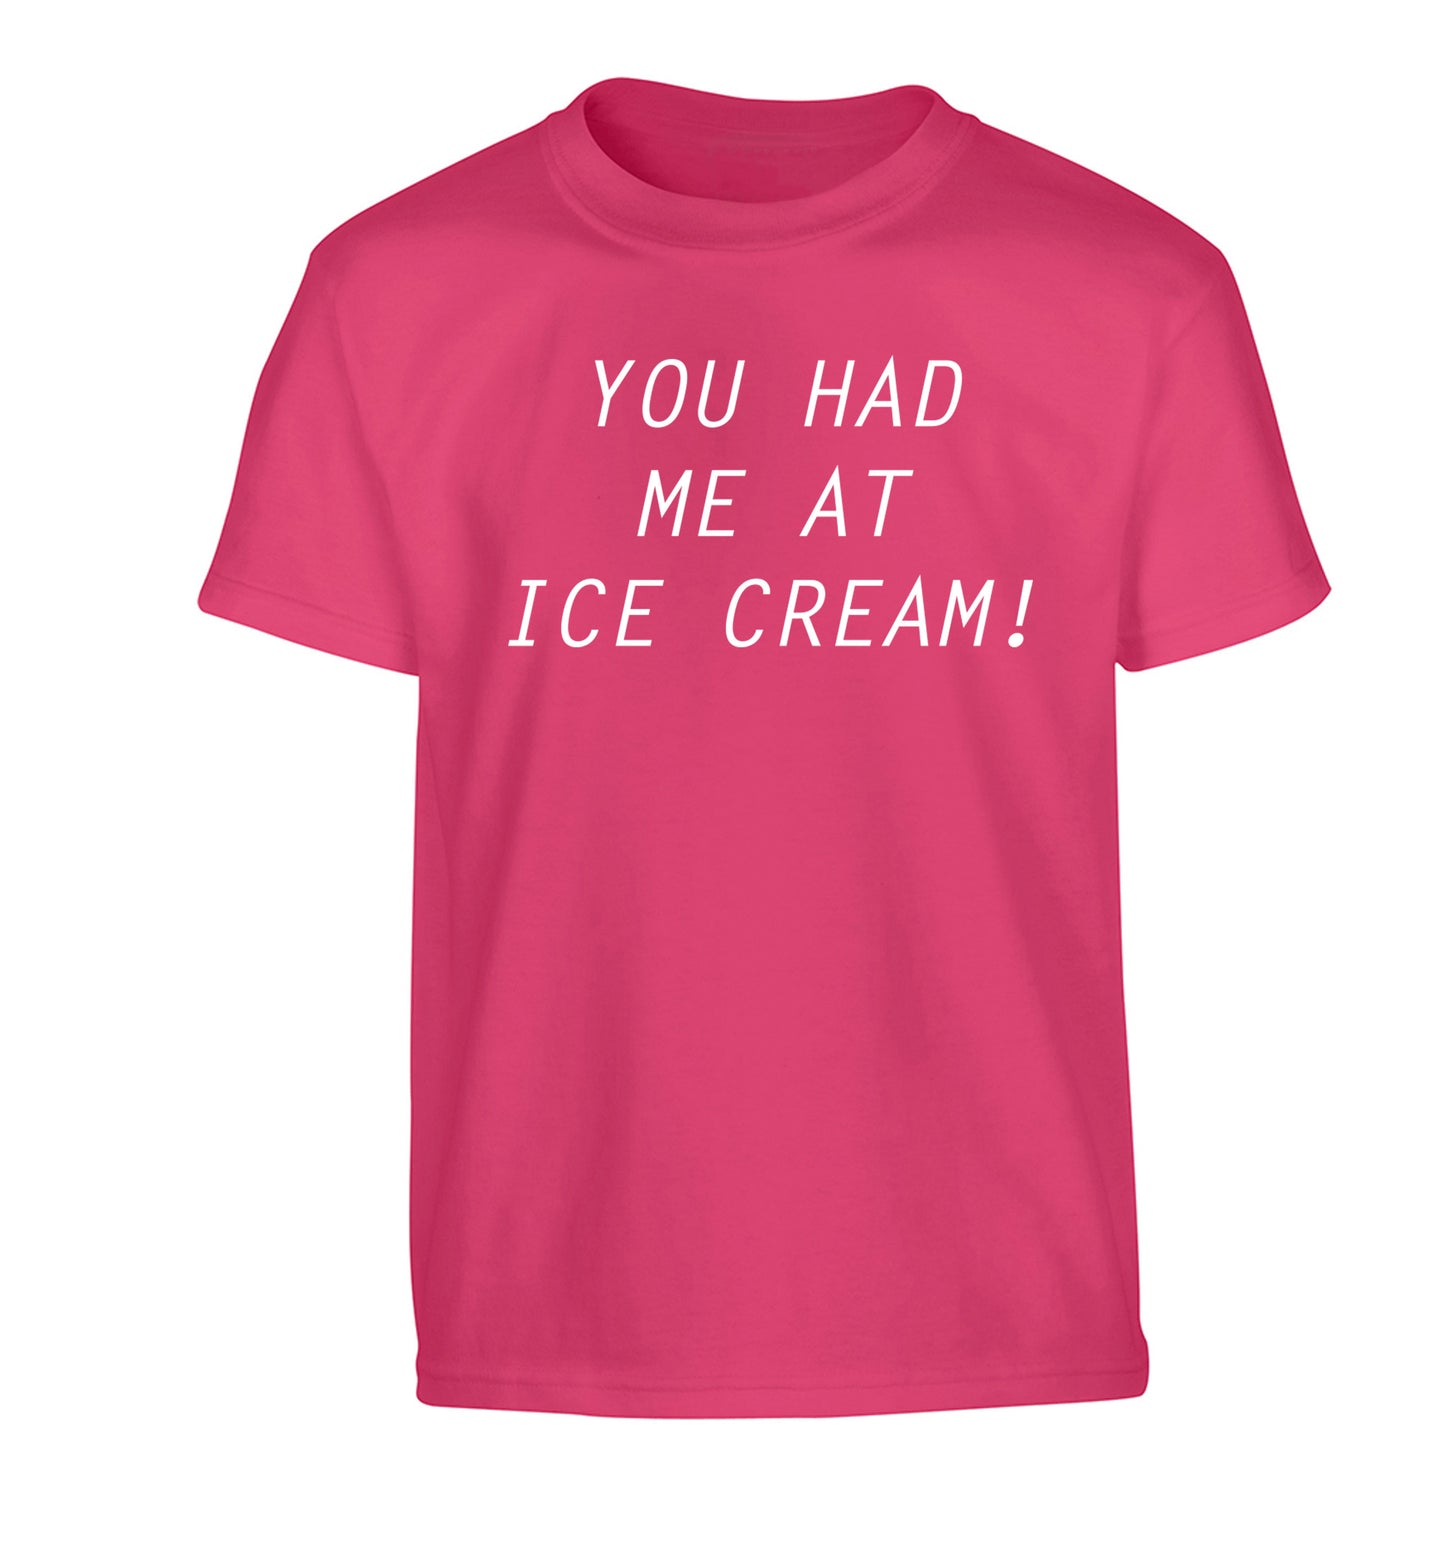 You had me at ice cream Children's pink Tshirt 12-14 Years